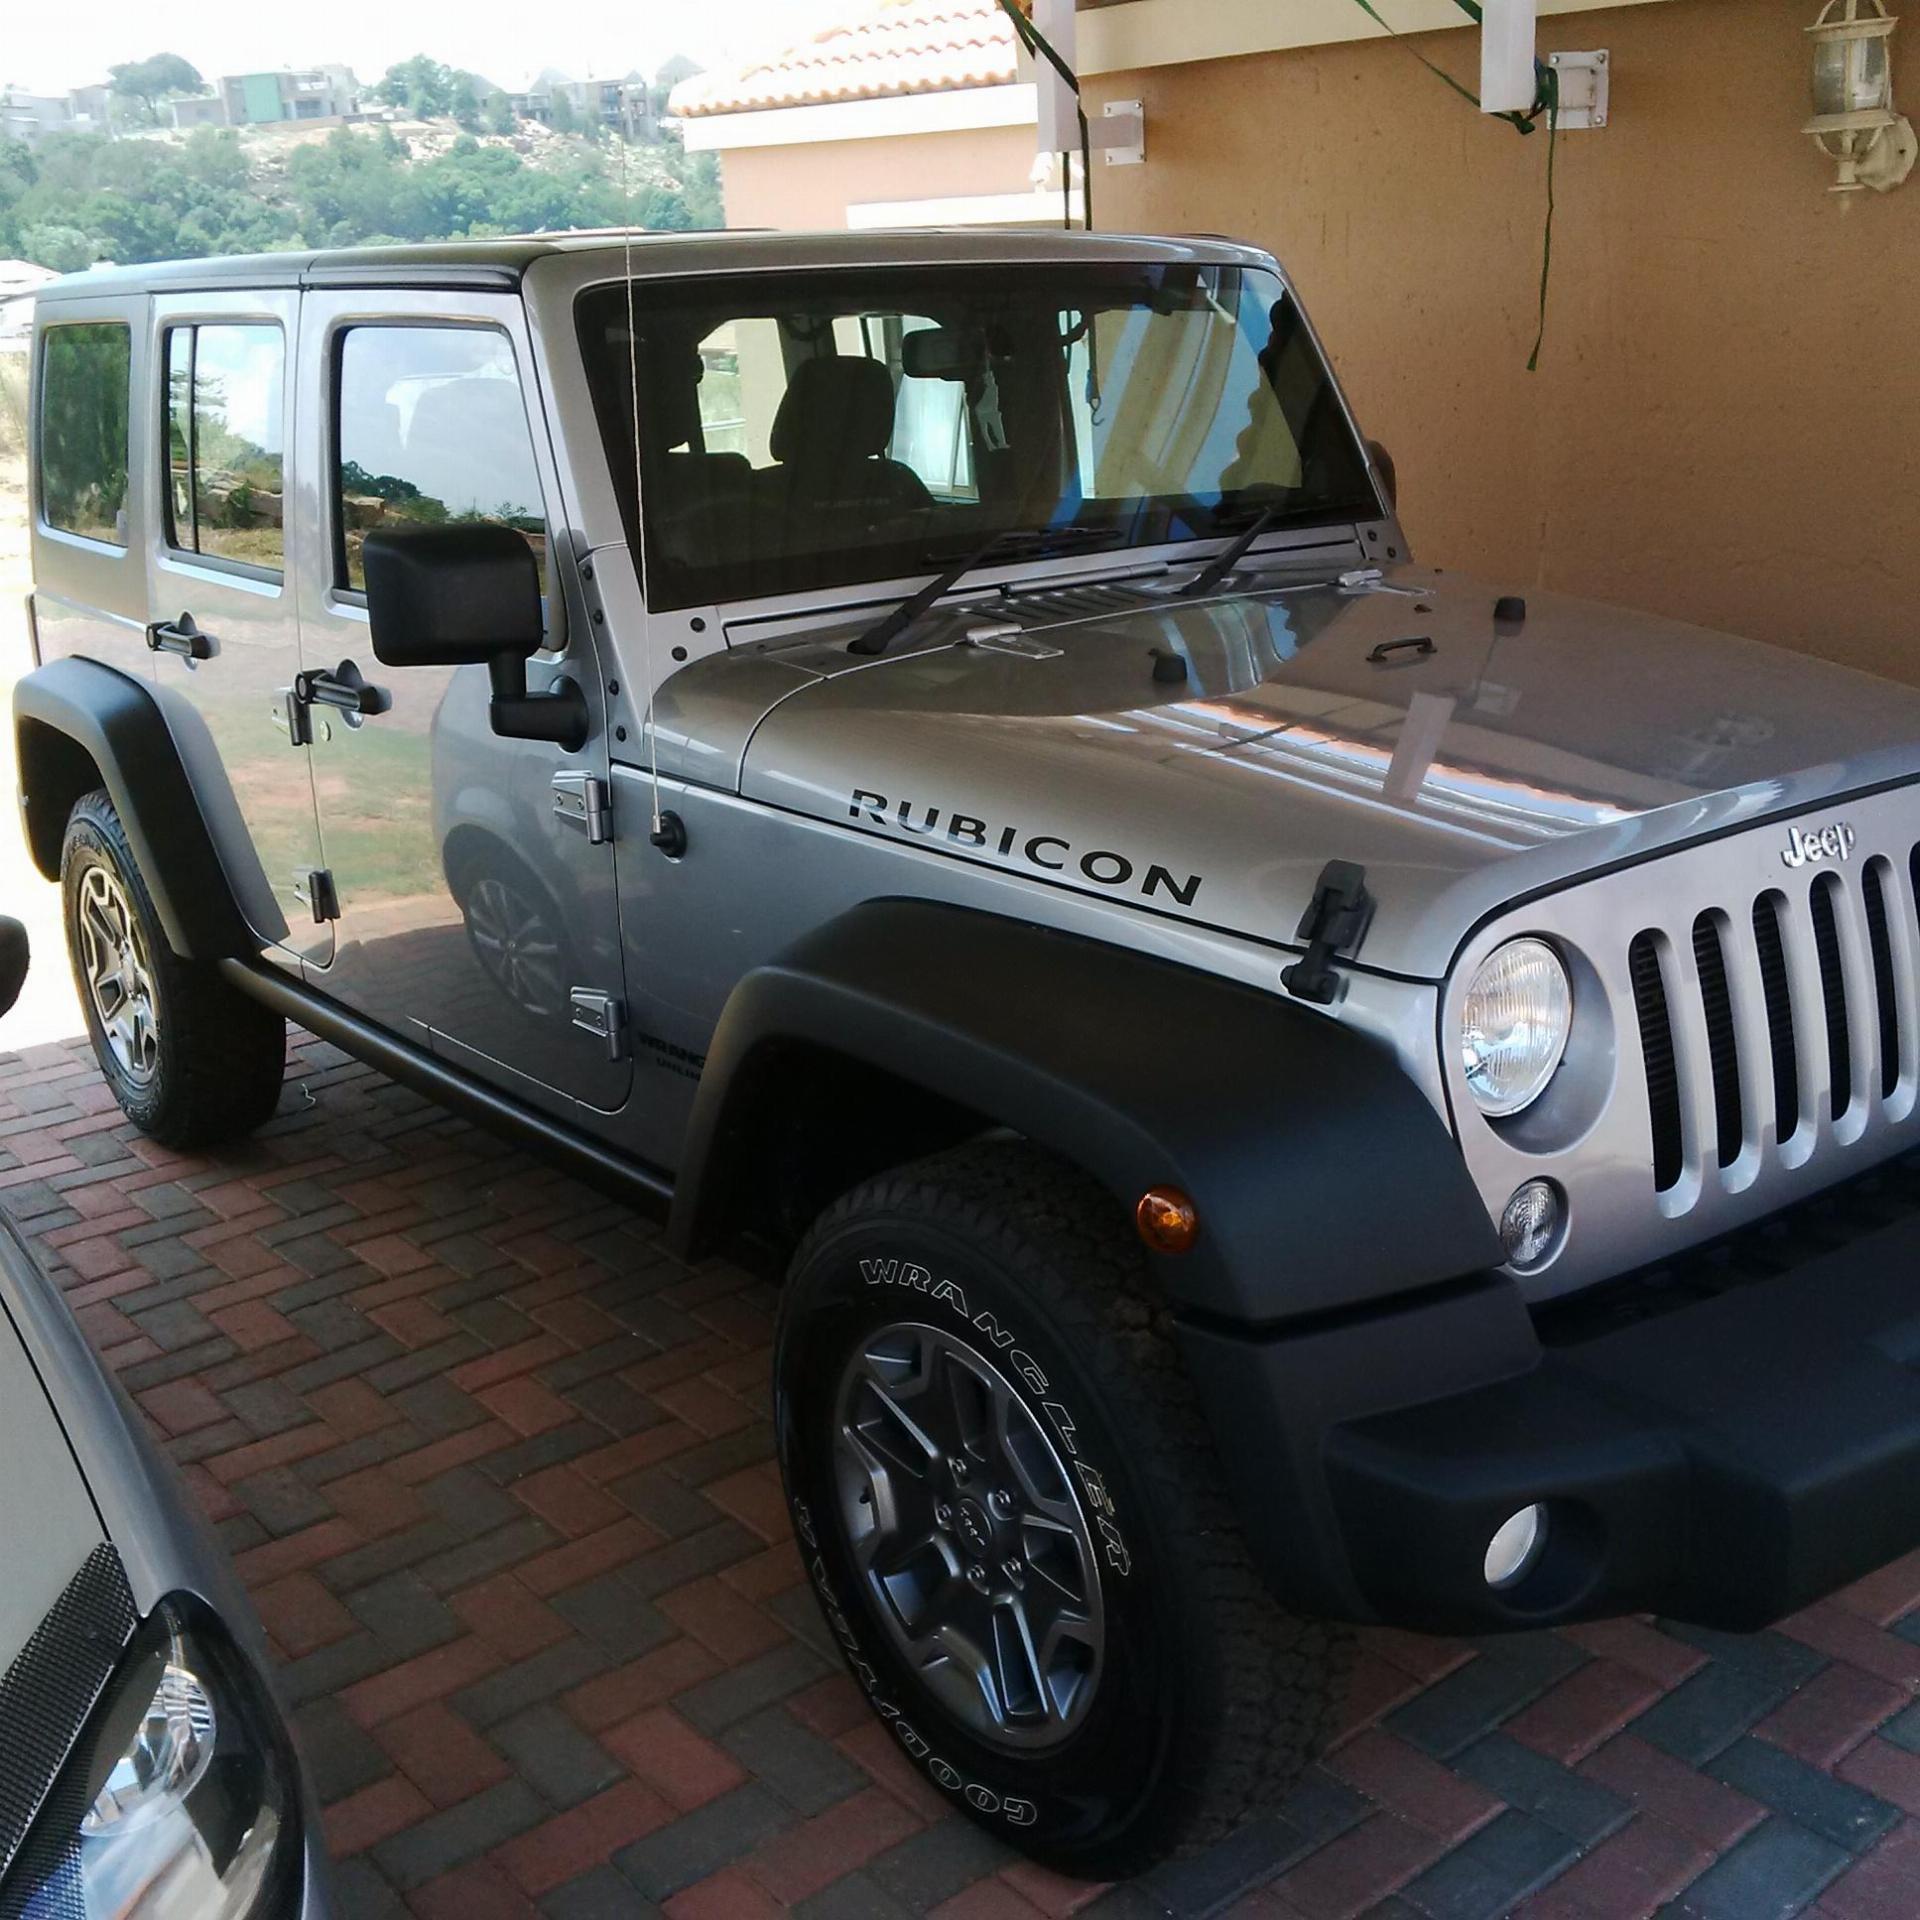 Used Jeep Wrangler Unlimited RUBICON,  V6 2015 on auction - PV1012512